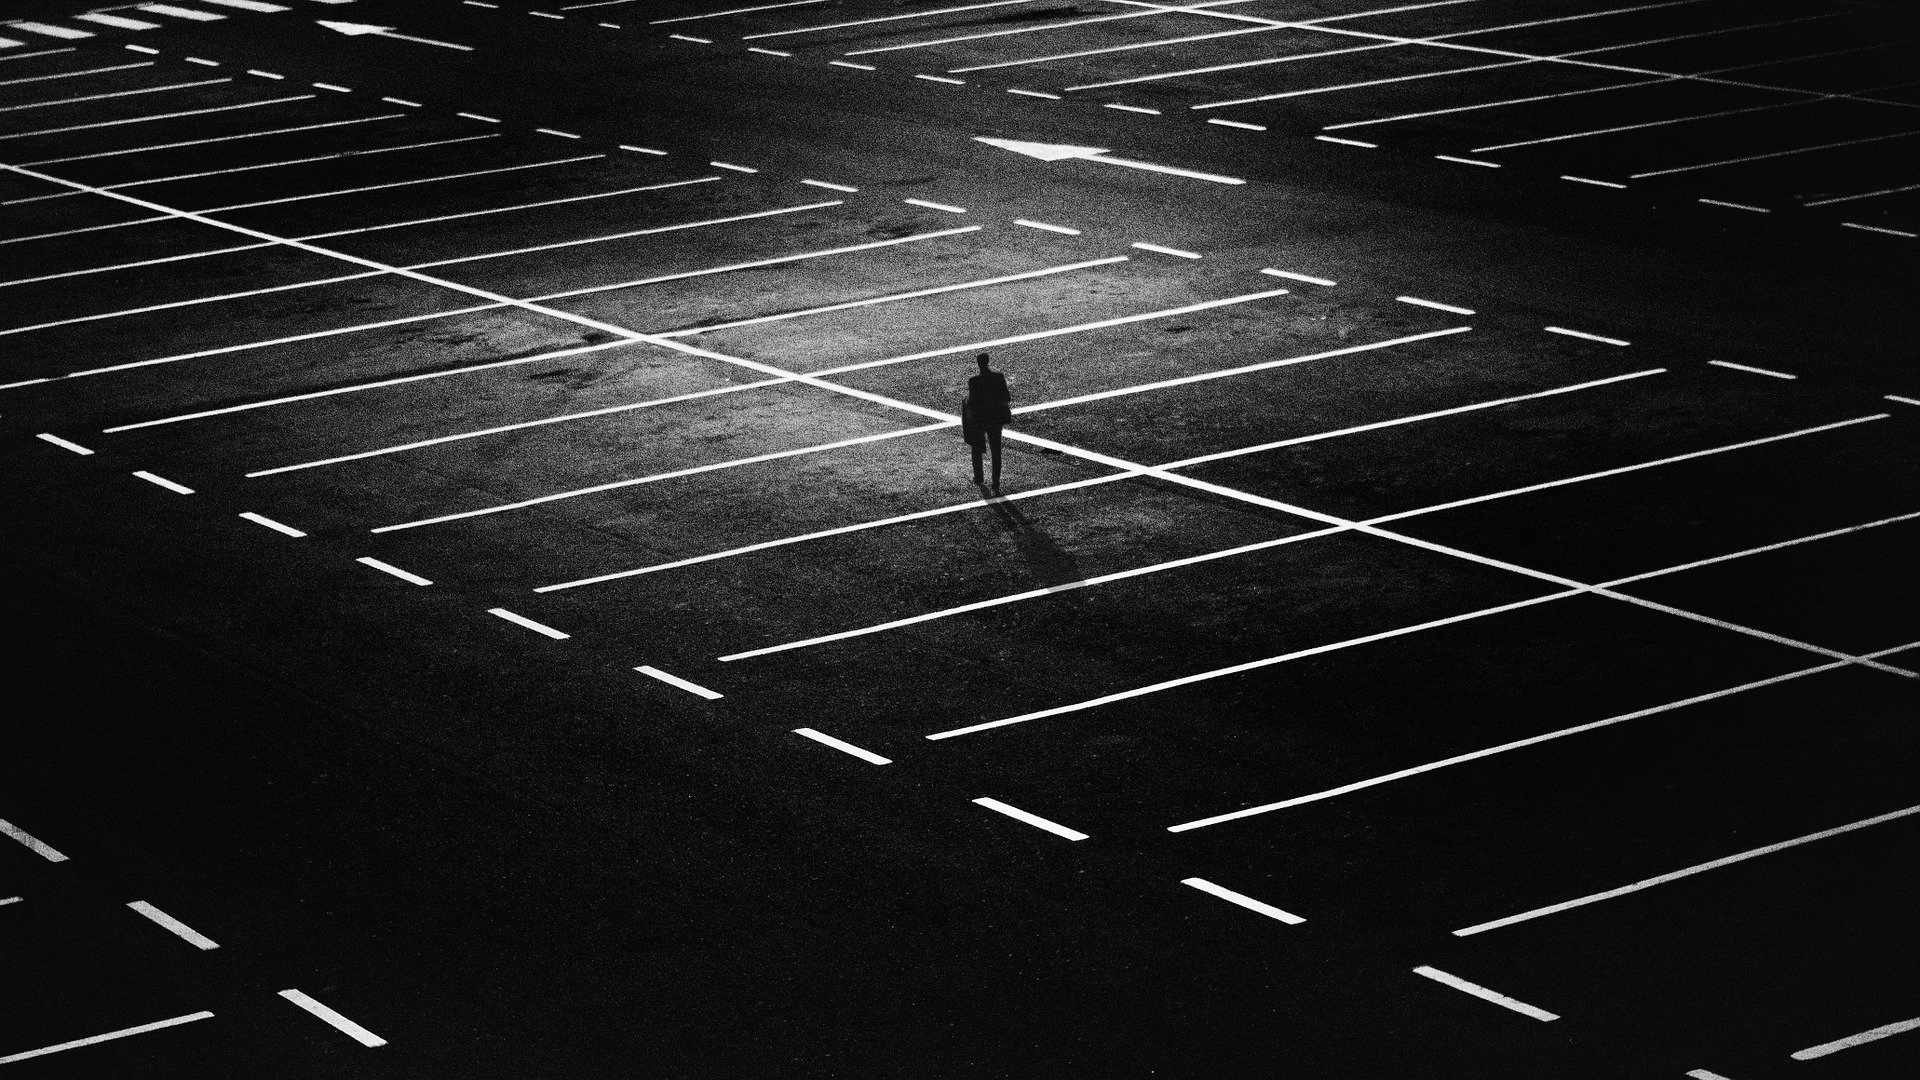 Alone in a nightime parking lot